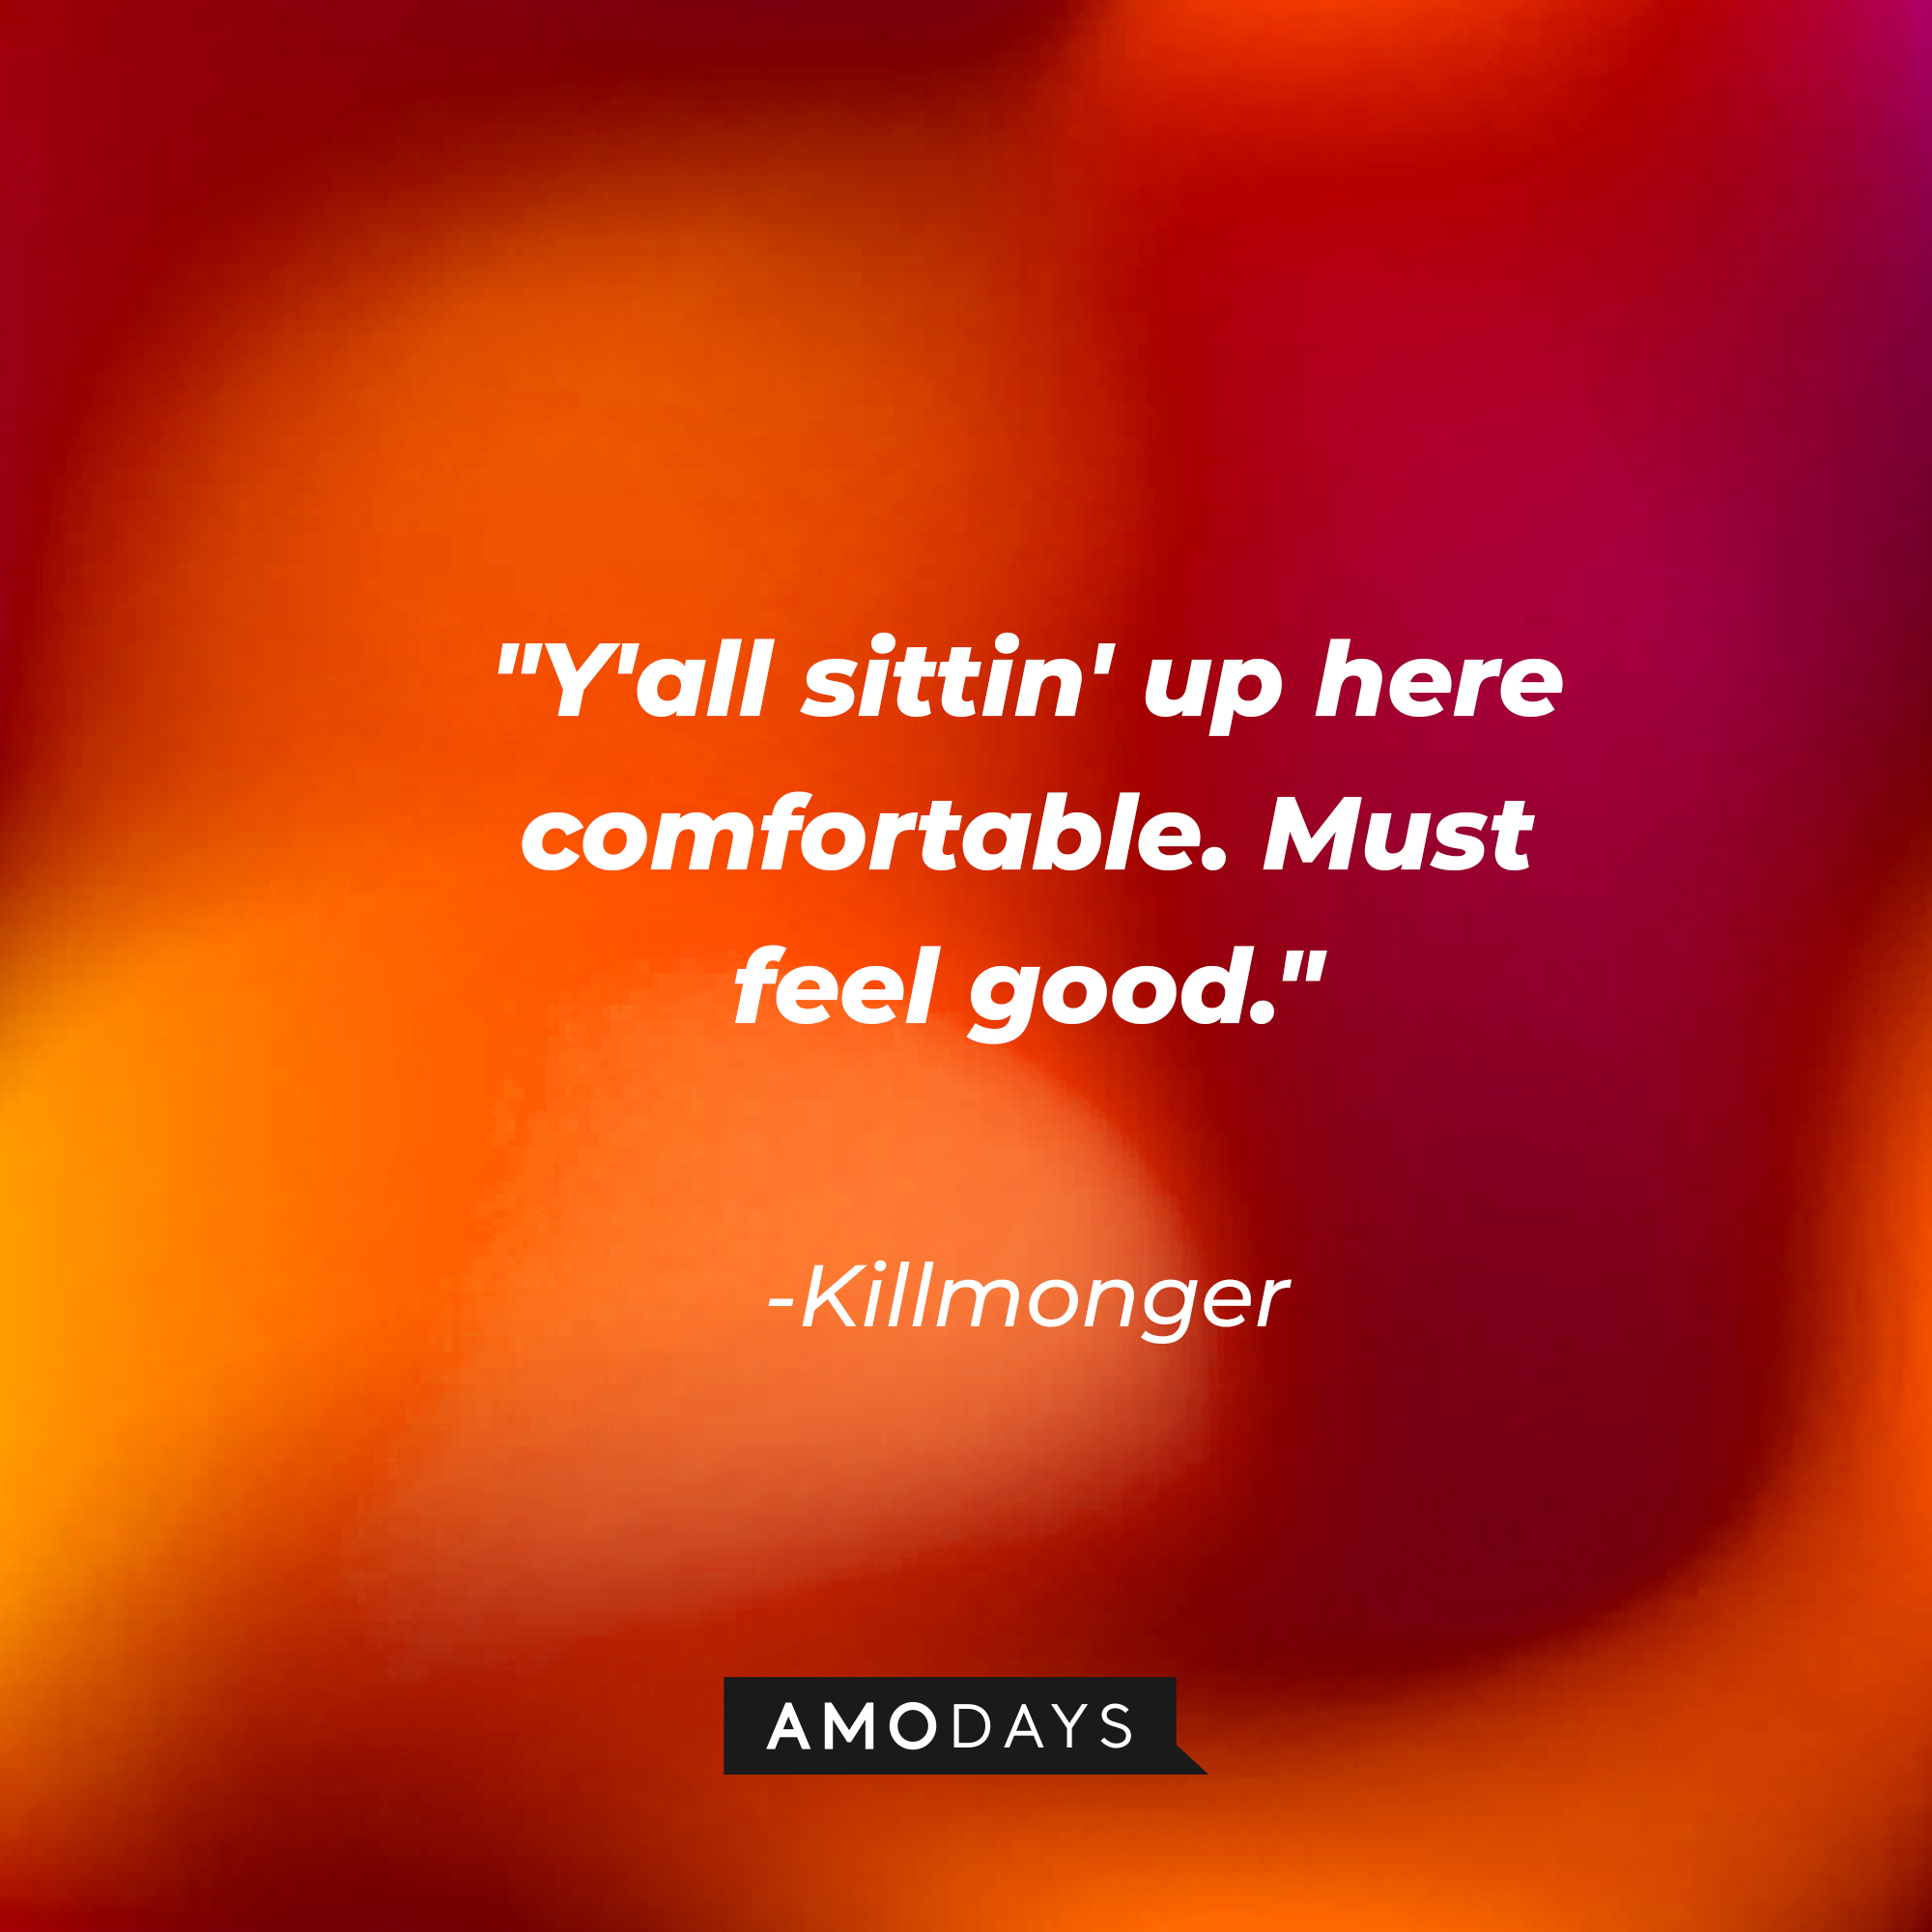 Killmonger's quote: "Y'all sittin' up here comfortable. Must feel good." | Source: AmoDays